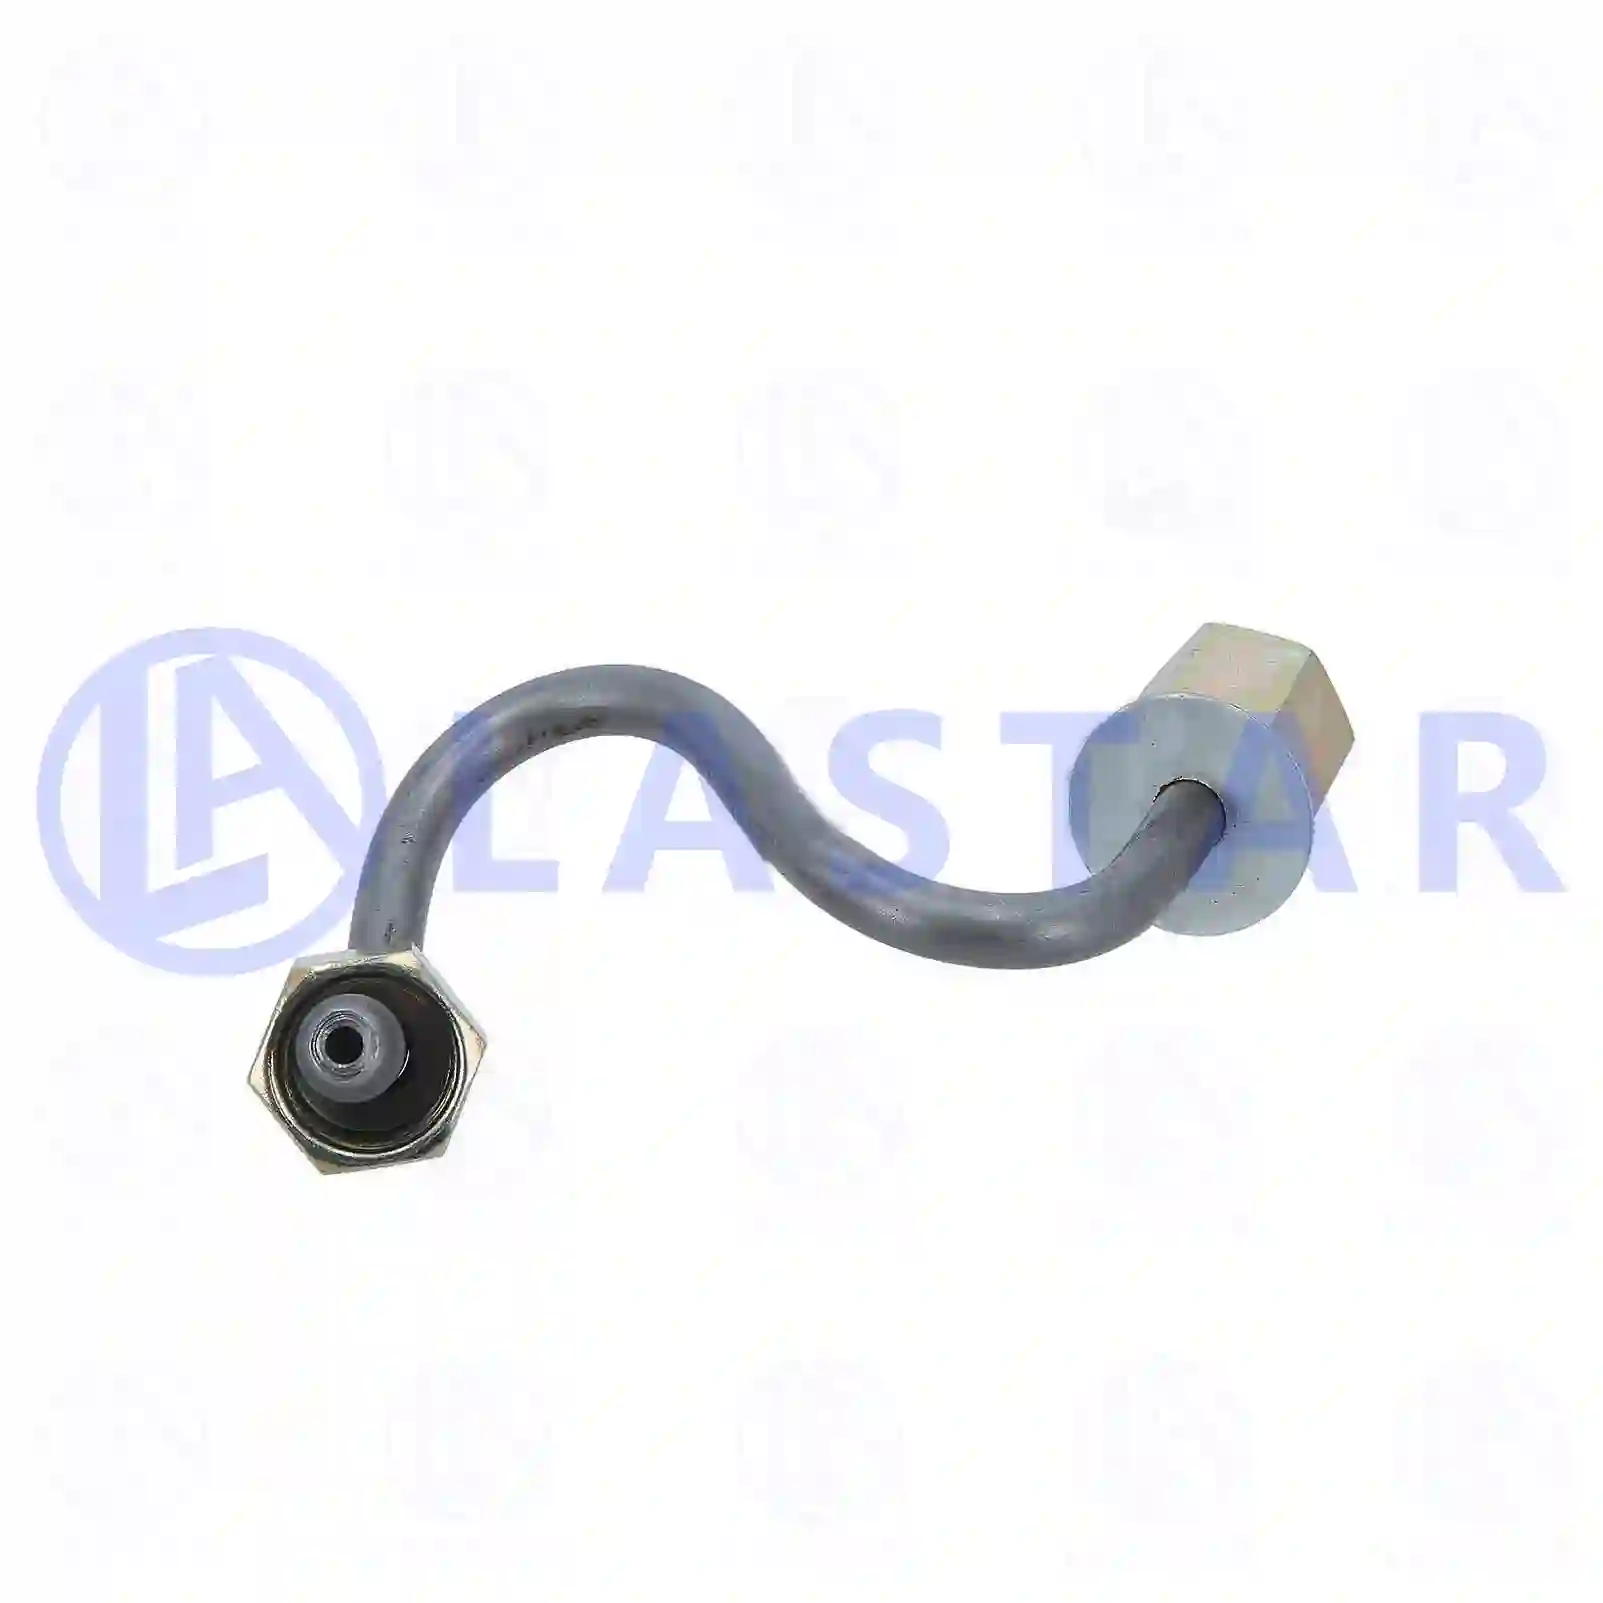 Injection line, 77723605, 6510702433, 65107 ||  77723605 Lastar Spare Part | Truck Spare Parts, Auotomotive Spare Parts Injection line, 77723605, 6510702433, 65107 ||  77723605 Lastar Spare Part | Truck Spare Parts, Auotomotive Spare Parts